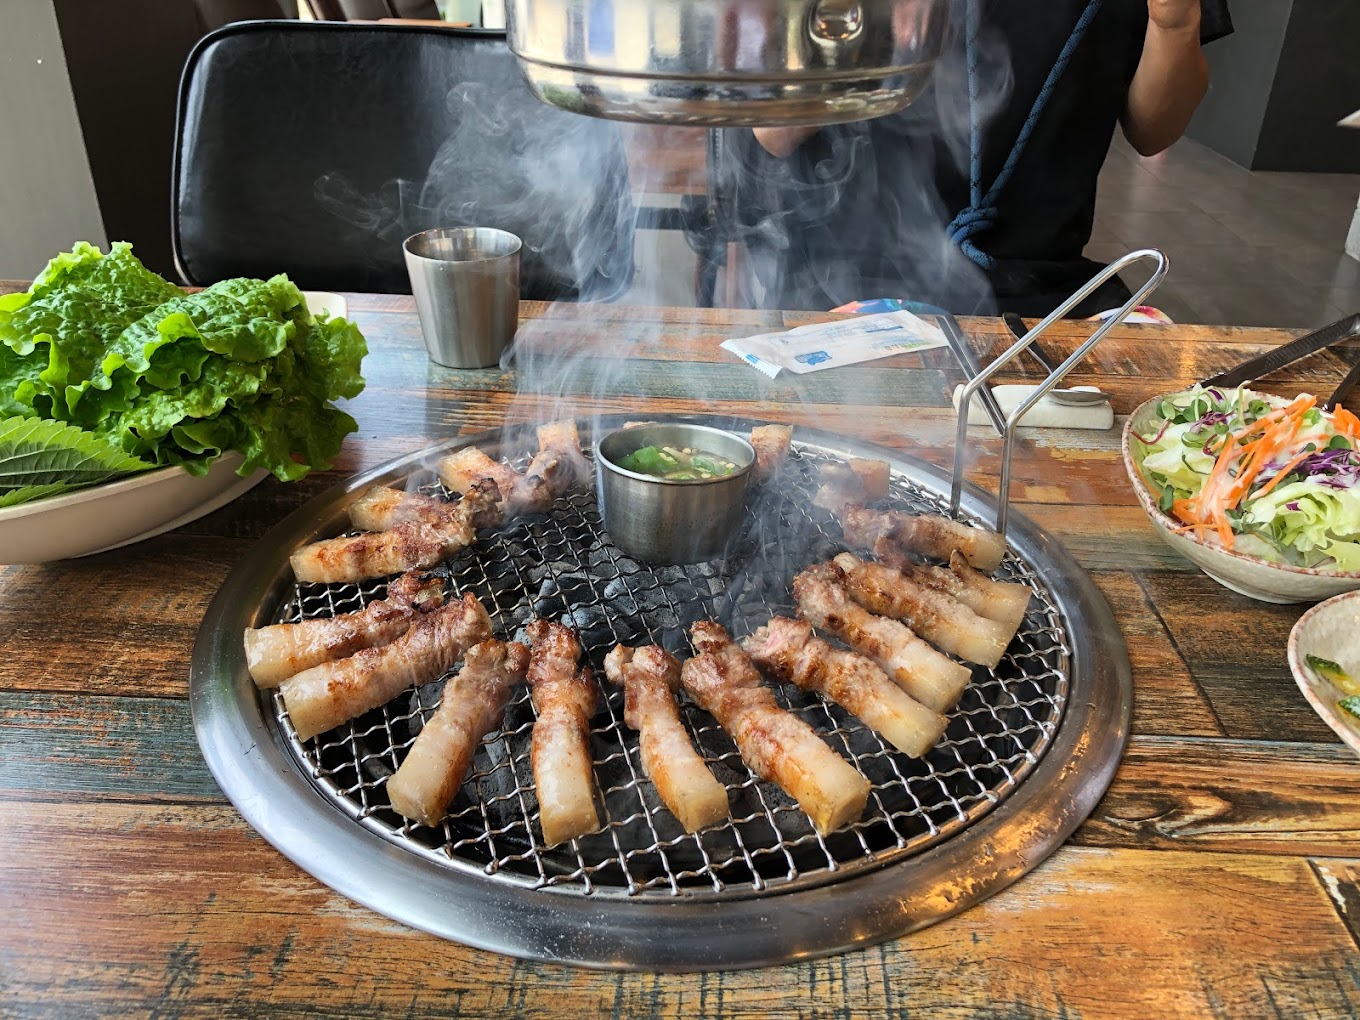 Things to do in Jeju Island - black pork barbecue